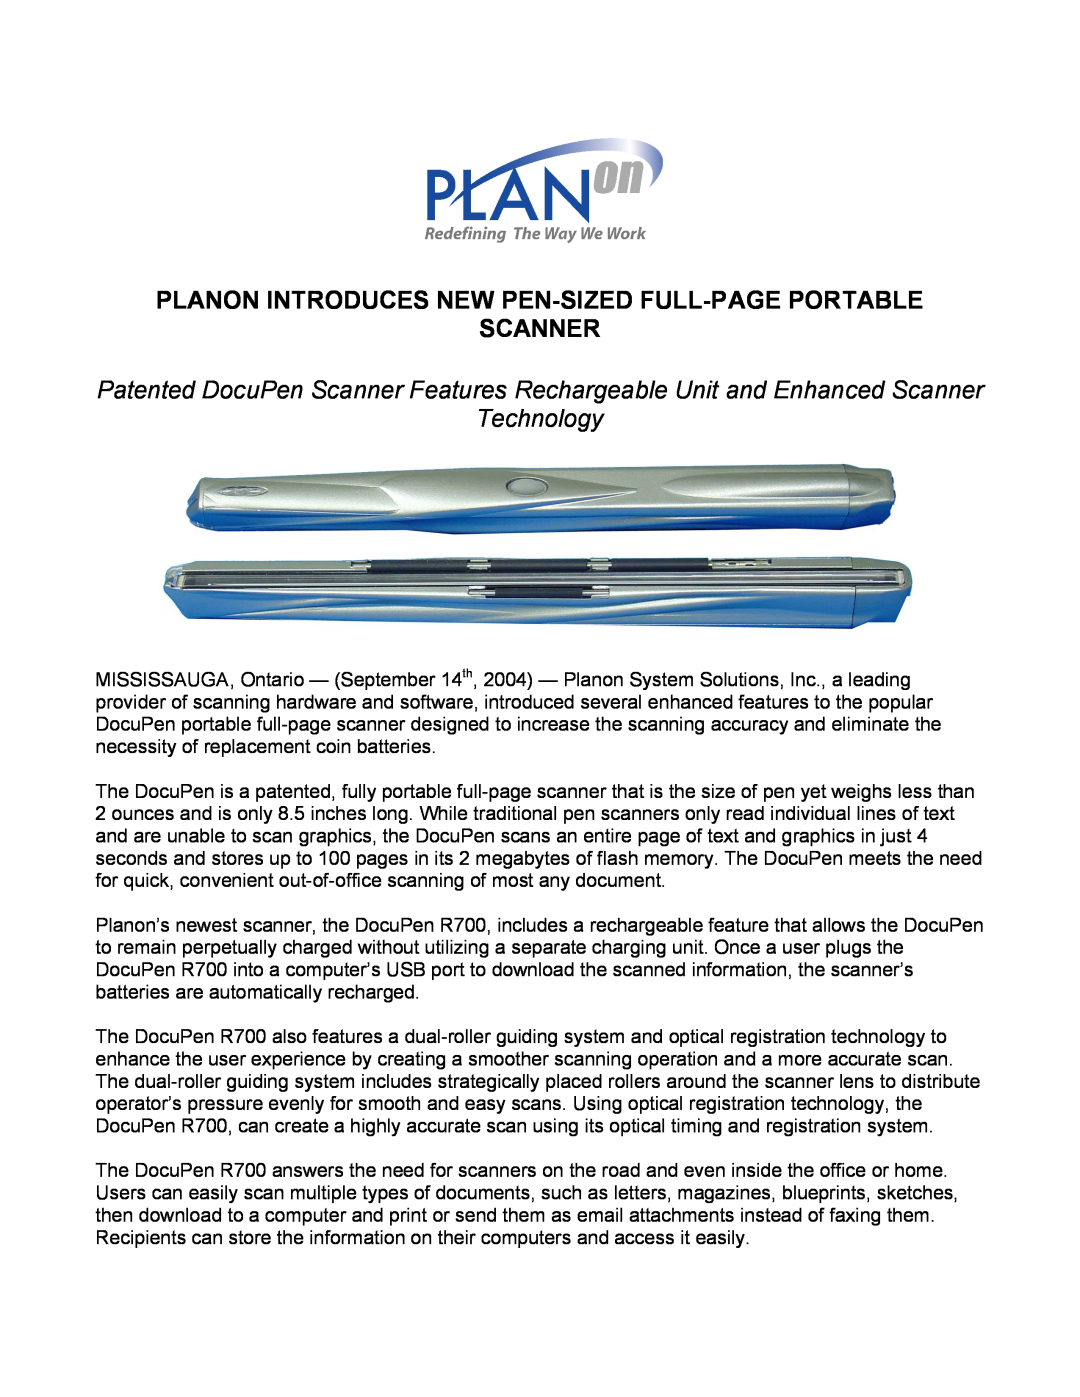 Planon System Solutions Pen-Sized Full-Page Portable Scanner manual 